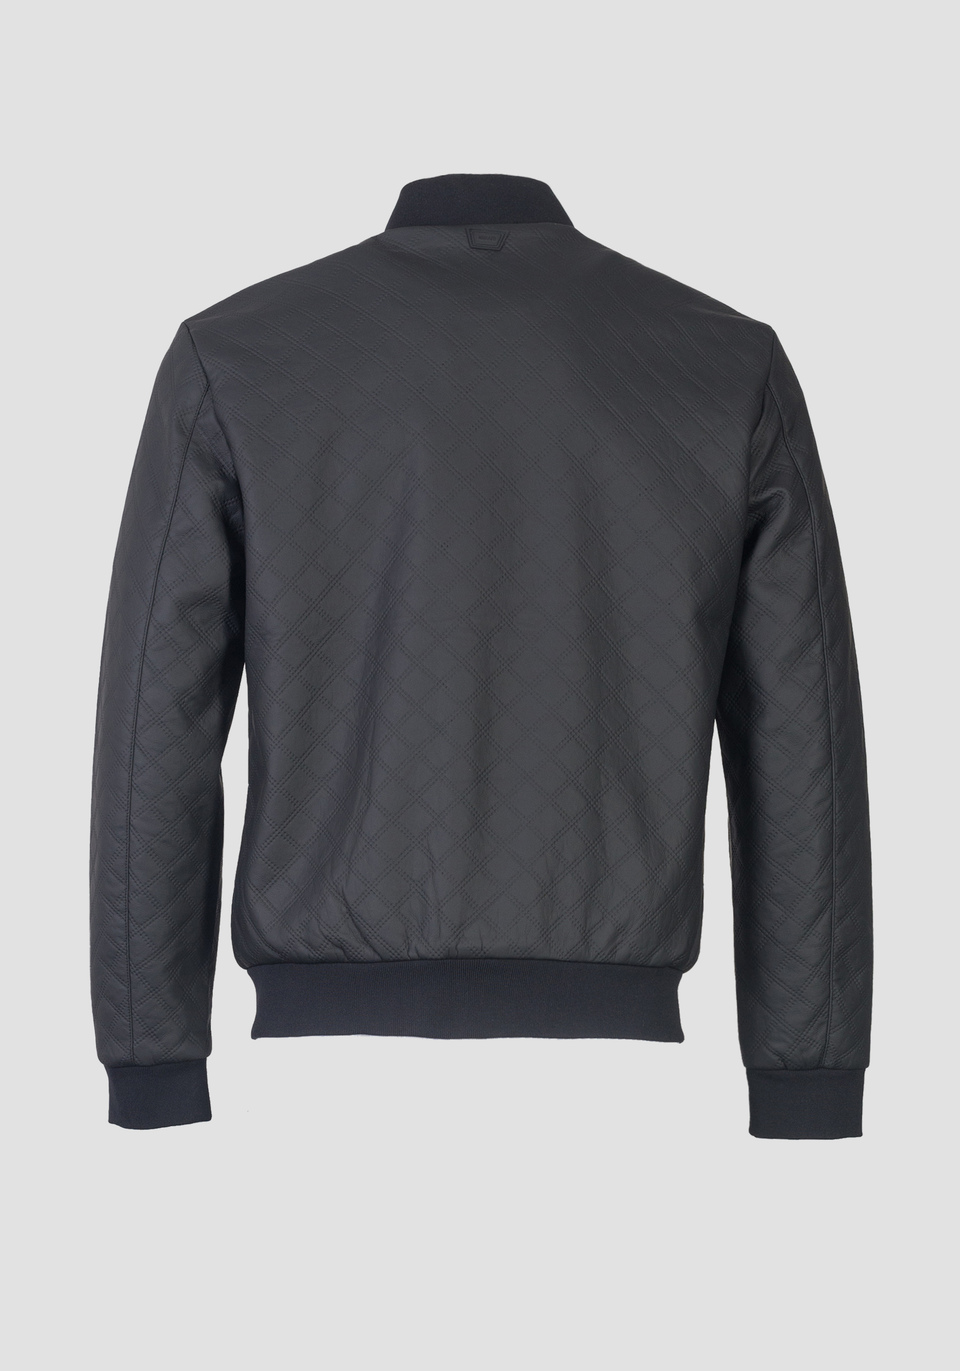 BOMBER JACKET IN LEATHERETTE WITH EMBOSSED PATTERN - Antony Morato Online Shop